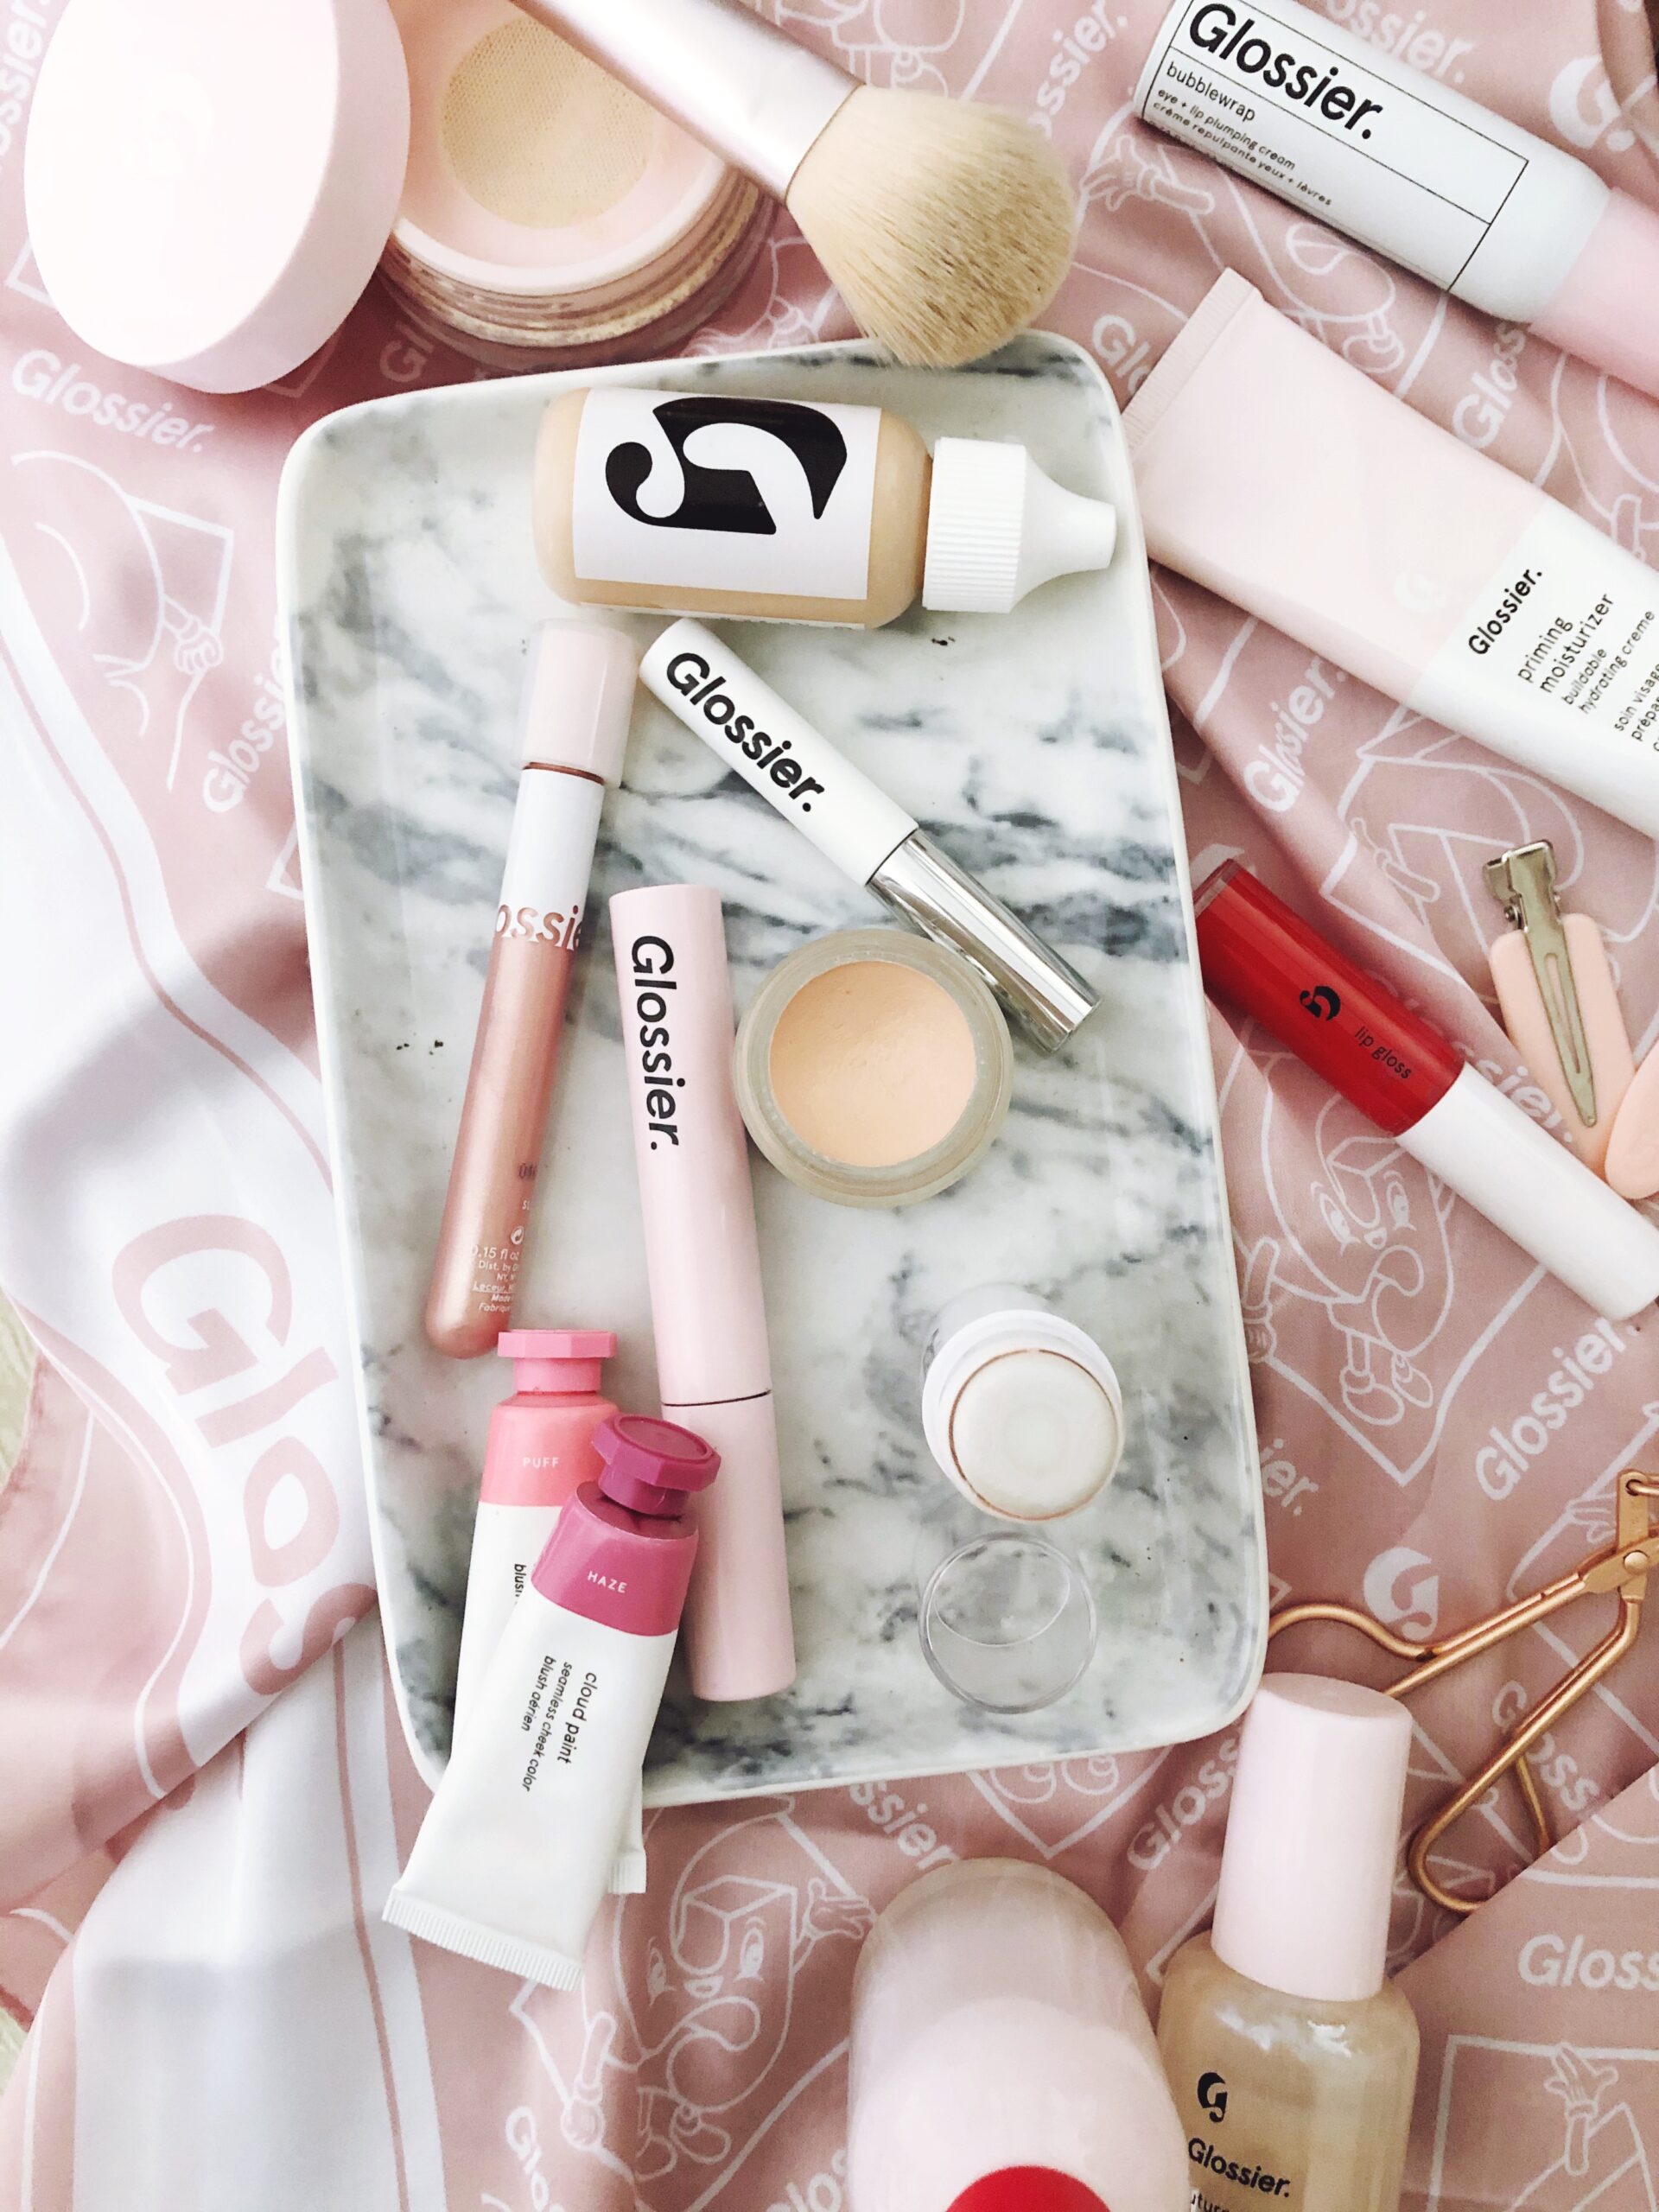 Glossier Makeup Look for Valentine's Day, The Beauty Minimalist